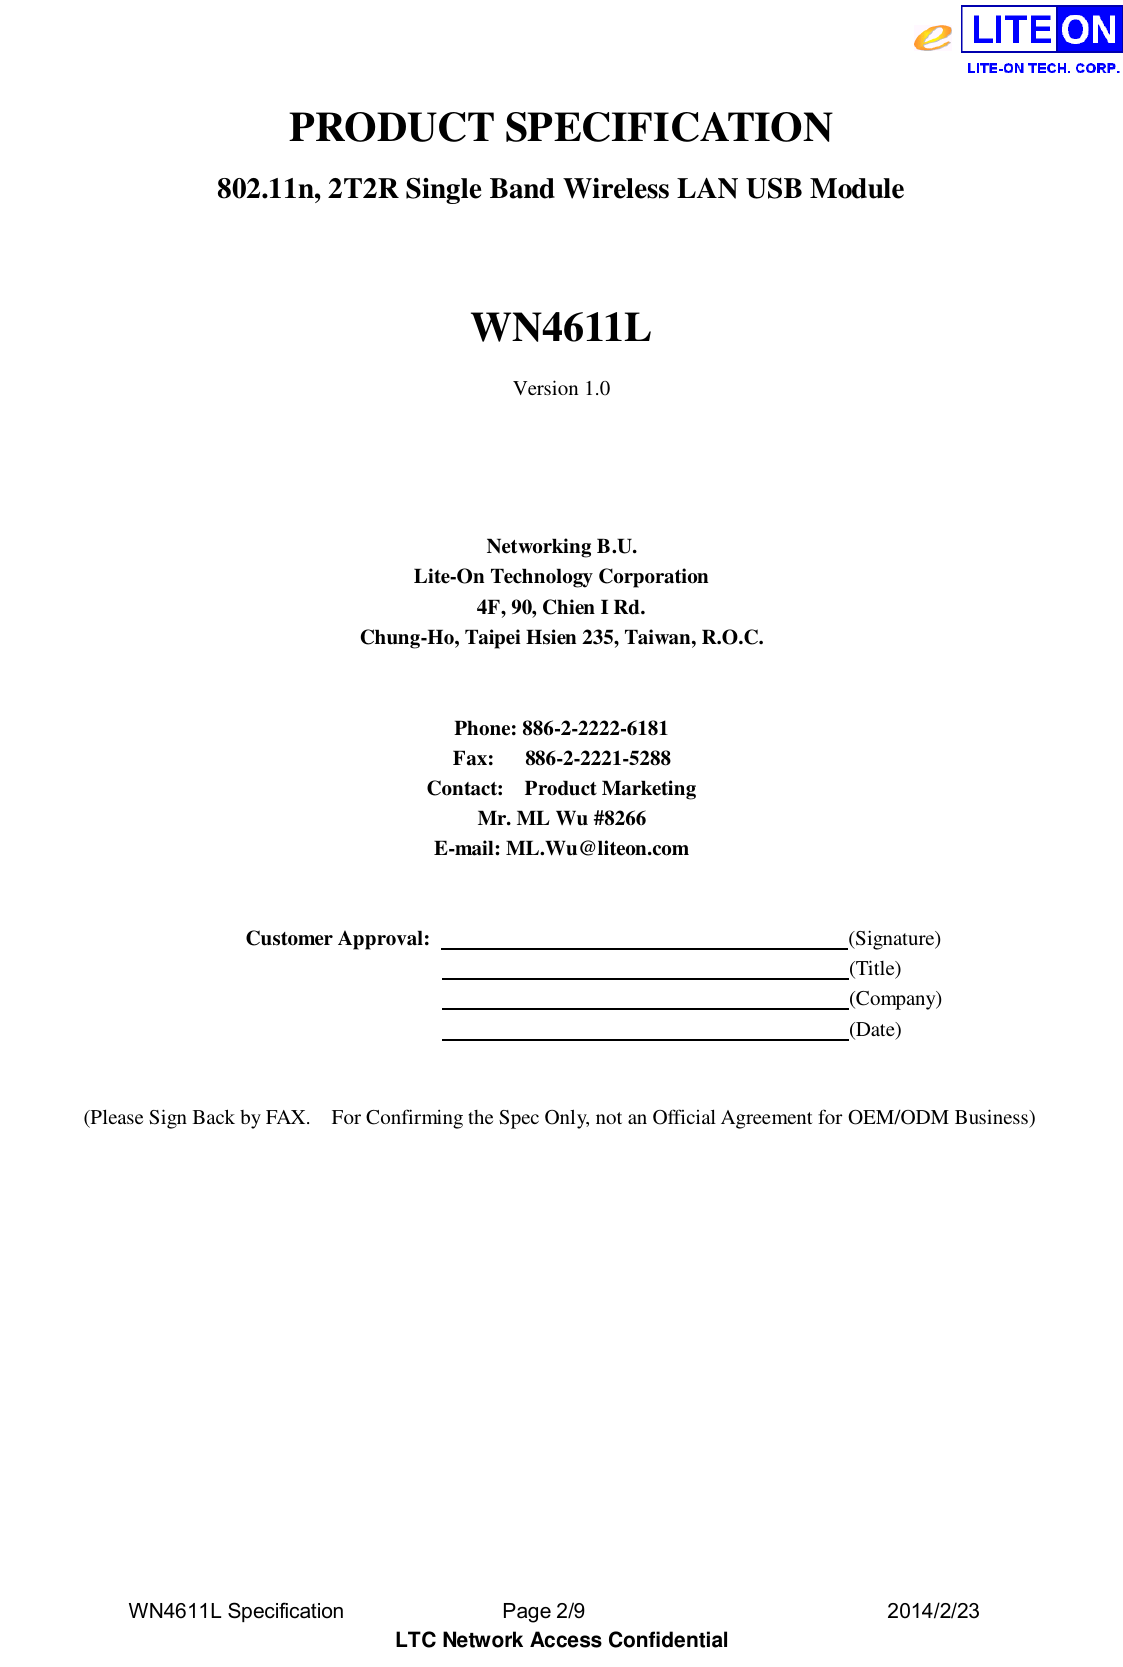  WN4611L Specification               Page 2/9                              2014/2/23 LTC Network Access Confidential PRODUCT SPECIFICATION 802.11n, 2T2R Single Band Wireless LAN USB Module  WN4611L Version 1.0     Networking B.U. Lite-On Technology Corporation 4F, 90, Chien I Rd. Chung-Ho, Taipei Hsien 235, Taiwan, R.O.C.   Phone: 886-2-2222-6181 Fax:      886-2-2221-5288 Contact:    Product Marketing Mr. ML Wu #8266 E-mail: ML.Wu@liteon.com     Customer Approval:                                         (Signature)                                                                      (Title)                                                                      (Company)                                                                      (Date)   (Please Sign Back by FAX.    For Confirming the Spec Only, not an Official Agreement for OEM/ODM Business) 